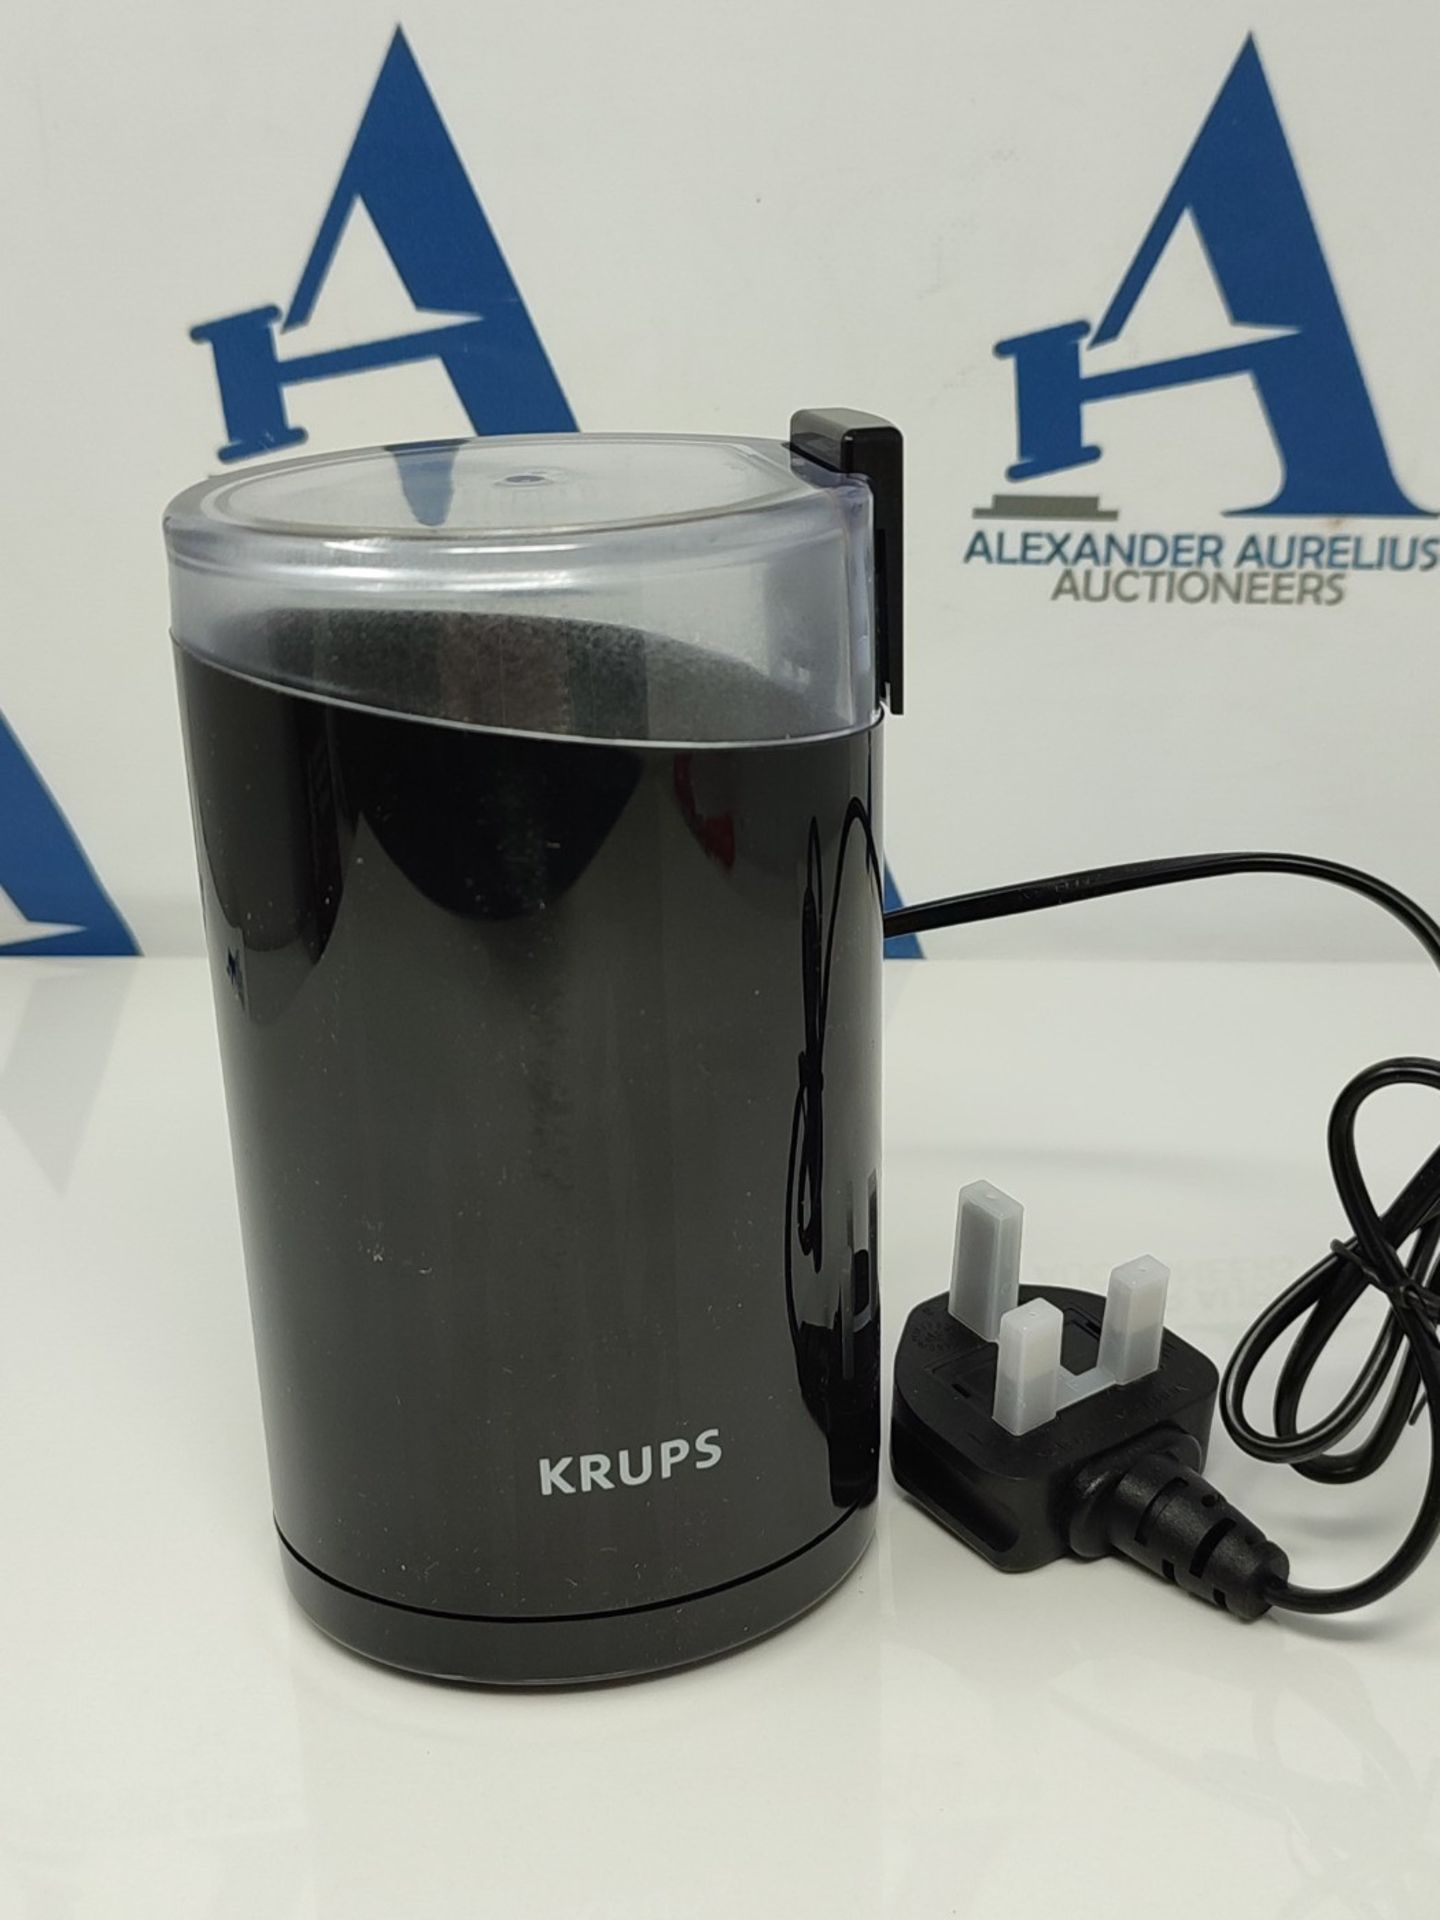 KRUPS Coffee Mill and Spice Grinder 12 Cup Easy to Use, One Touch Operation 200 Watts - Image 3 of 3